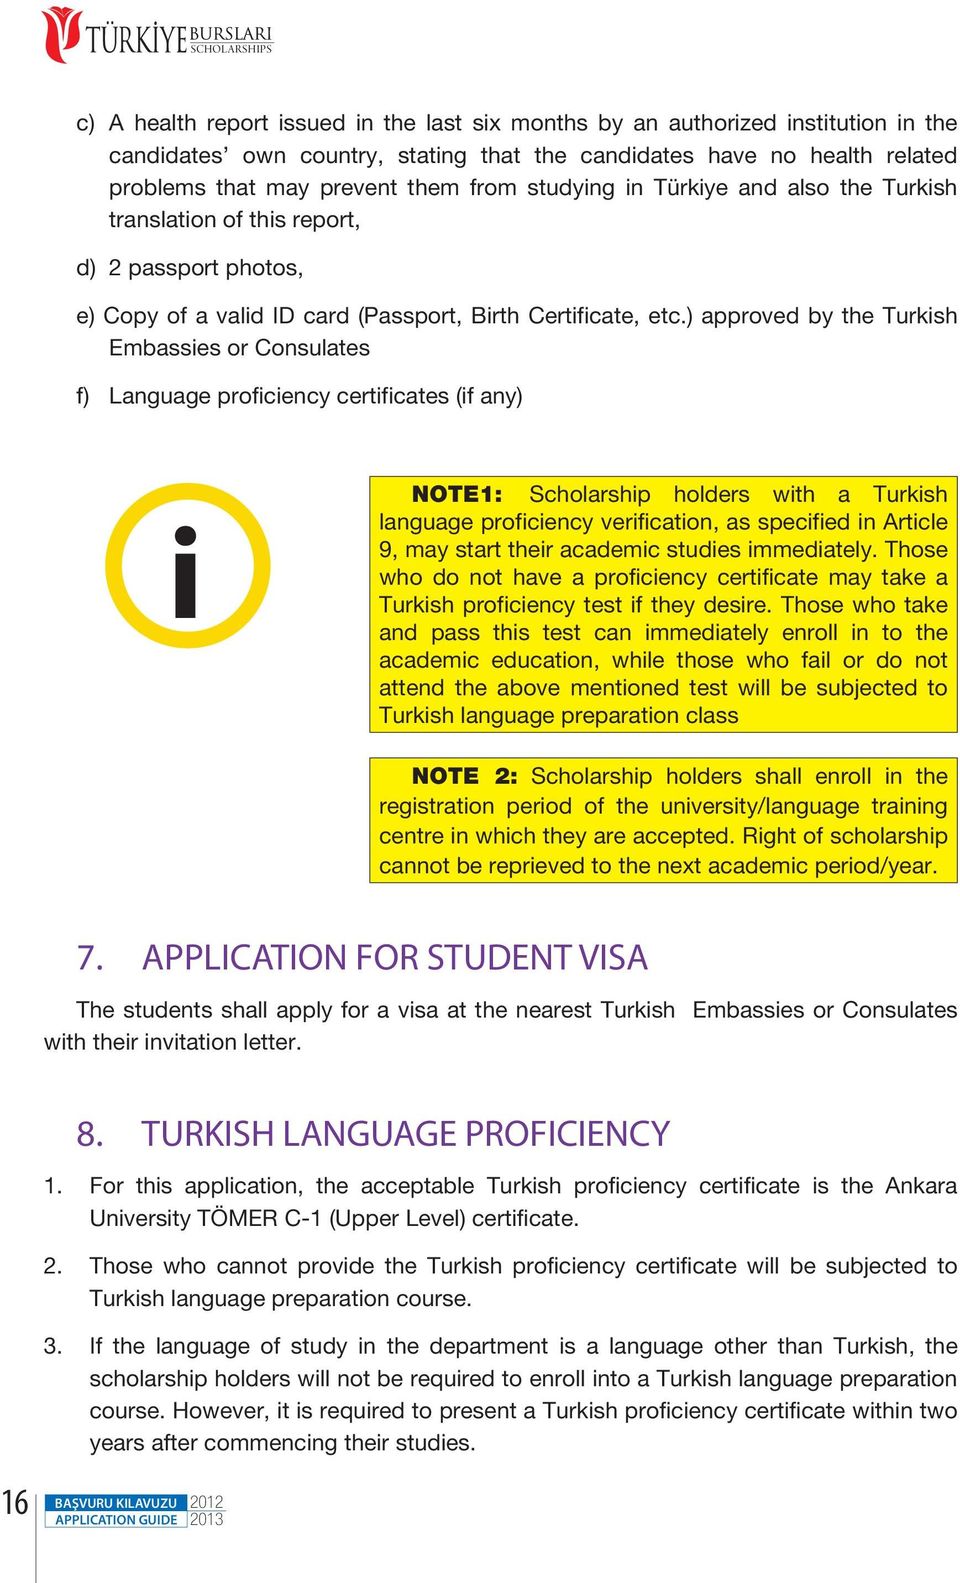 ) approved by the Turkish Embassies or Consulates f) Language proficiency certificates (if any) i NOTE1: Scholarship holders with a Turkish language proficiency verification, as specified in Article